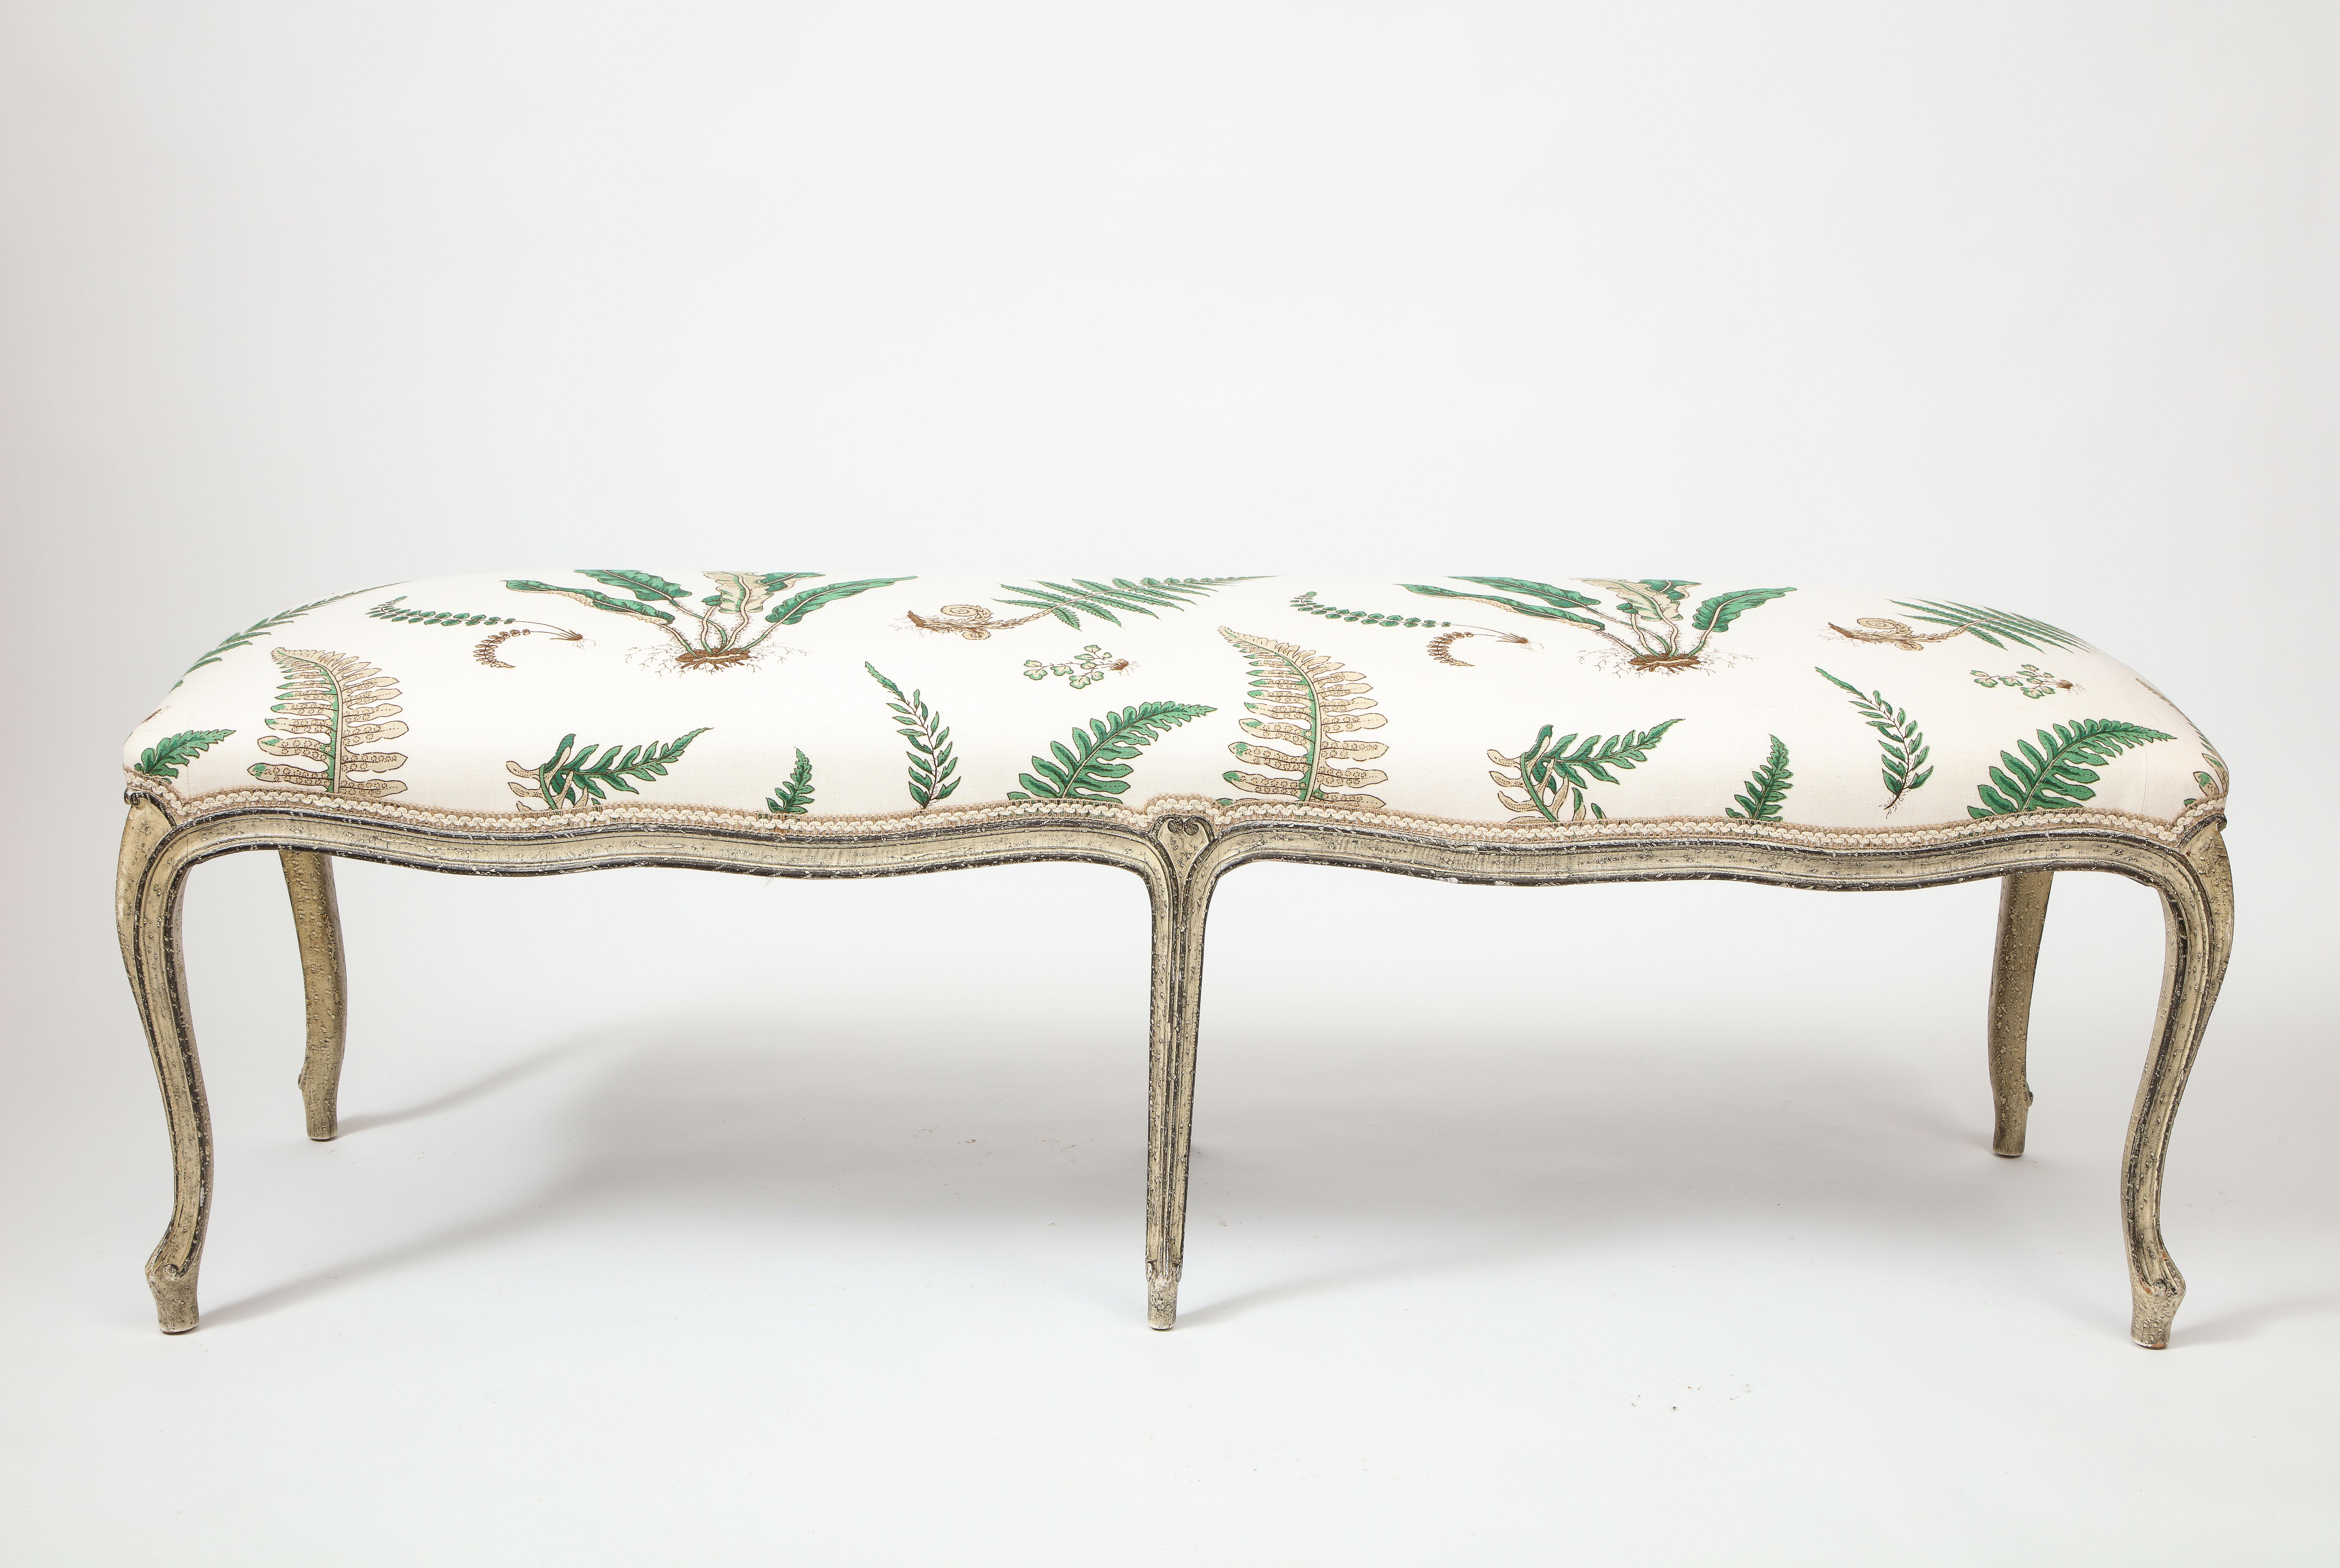 Of generous scale and with both front and back of serpentine form so bench can float nicely in a room if needed; the seat newly upholstered in Baker's Ferns over a channeled seat rail and cabriole legs ending in pad form feet. The wood frame painted